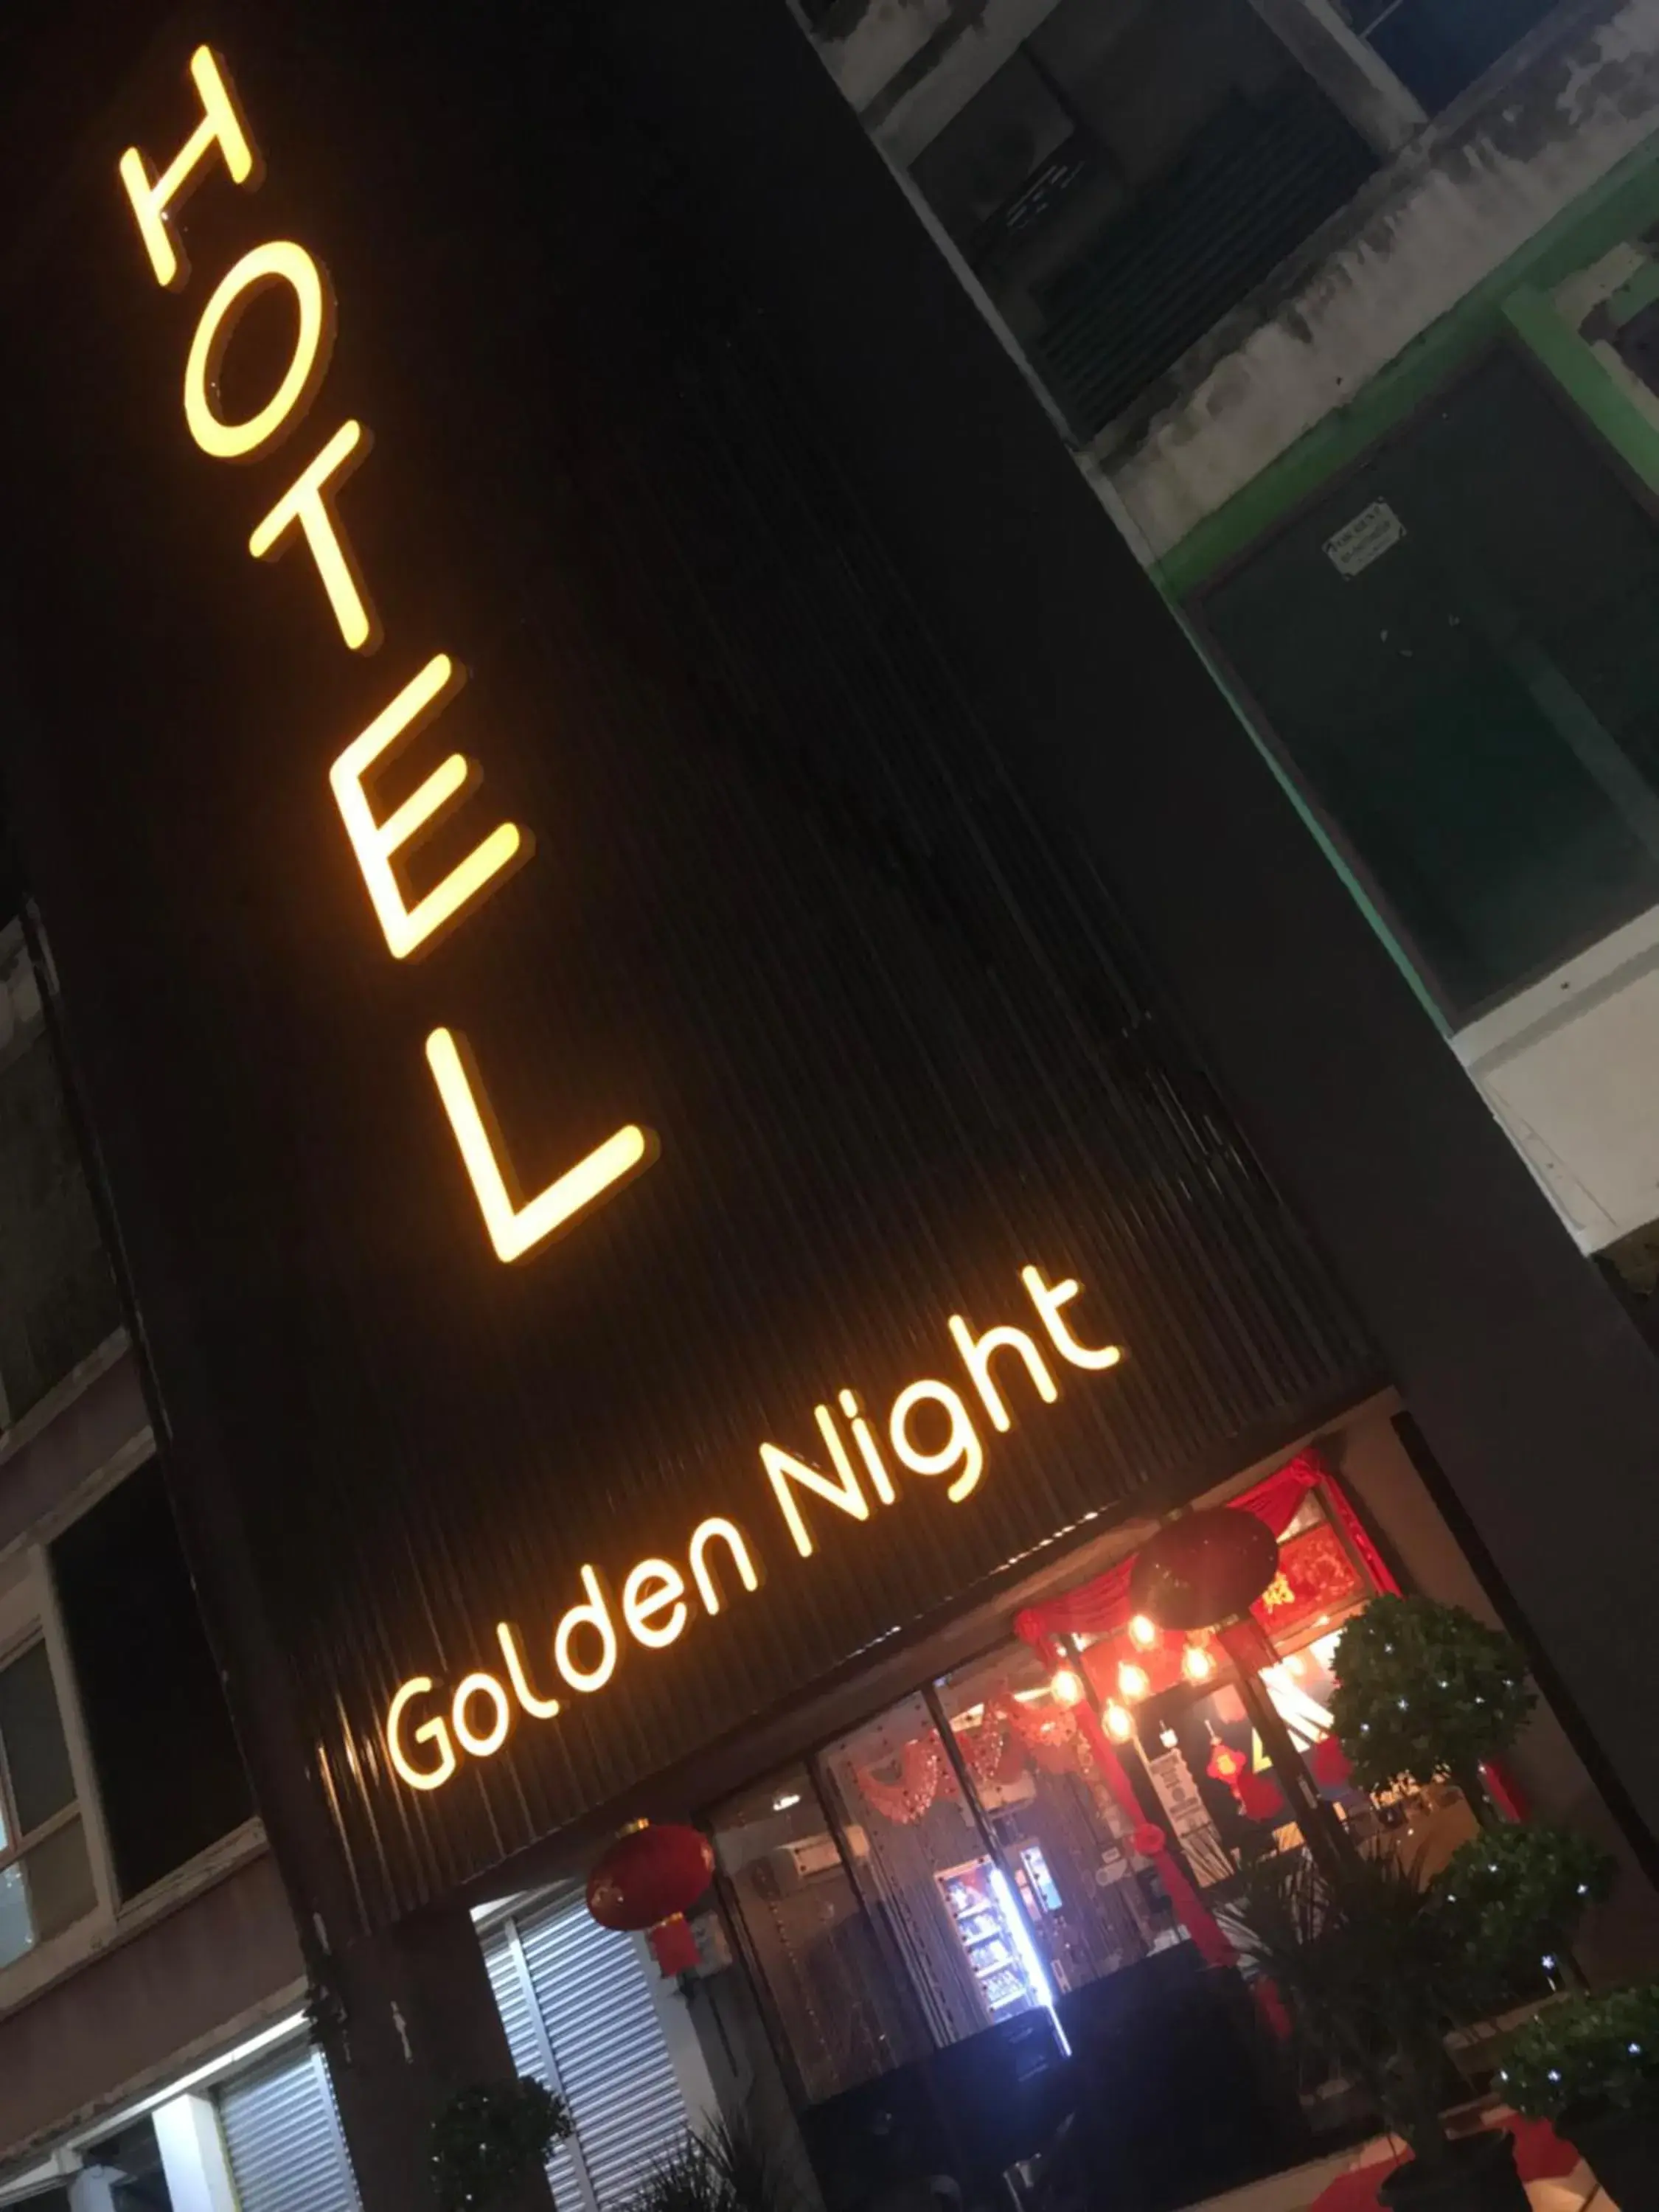 Property logo or sign in Golden Night Hotel